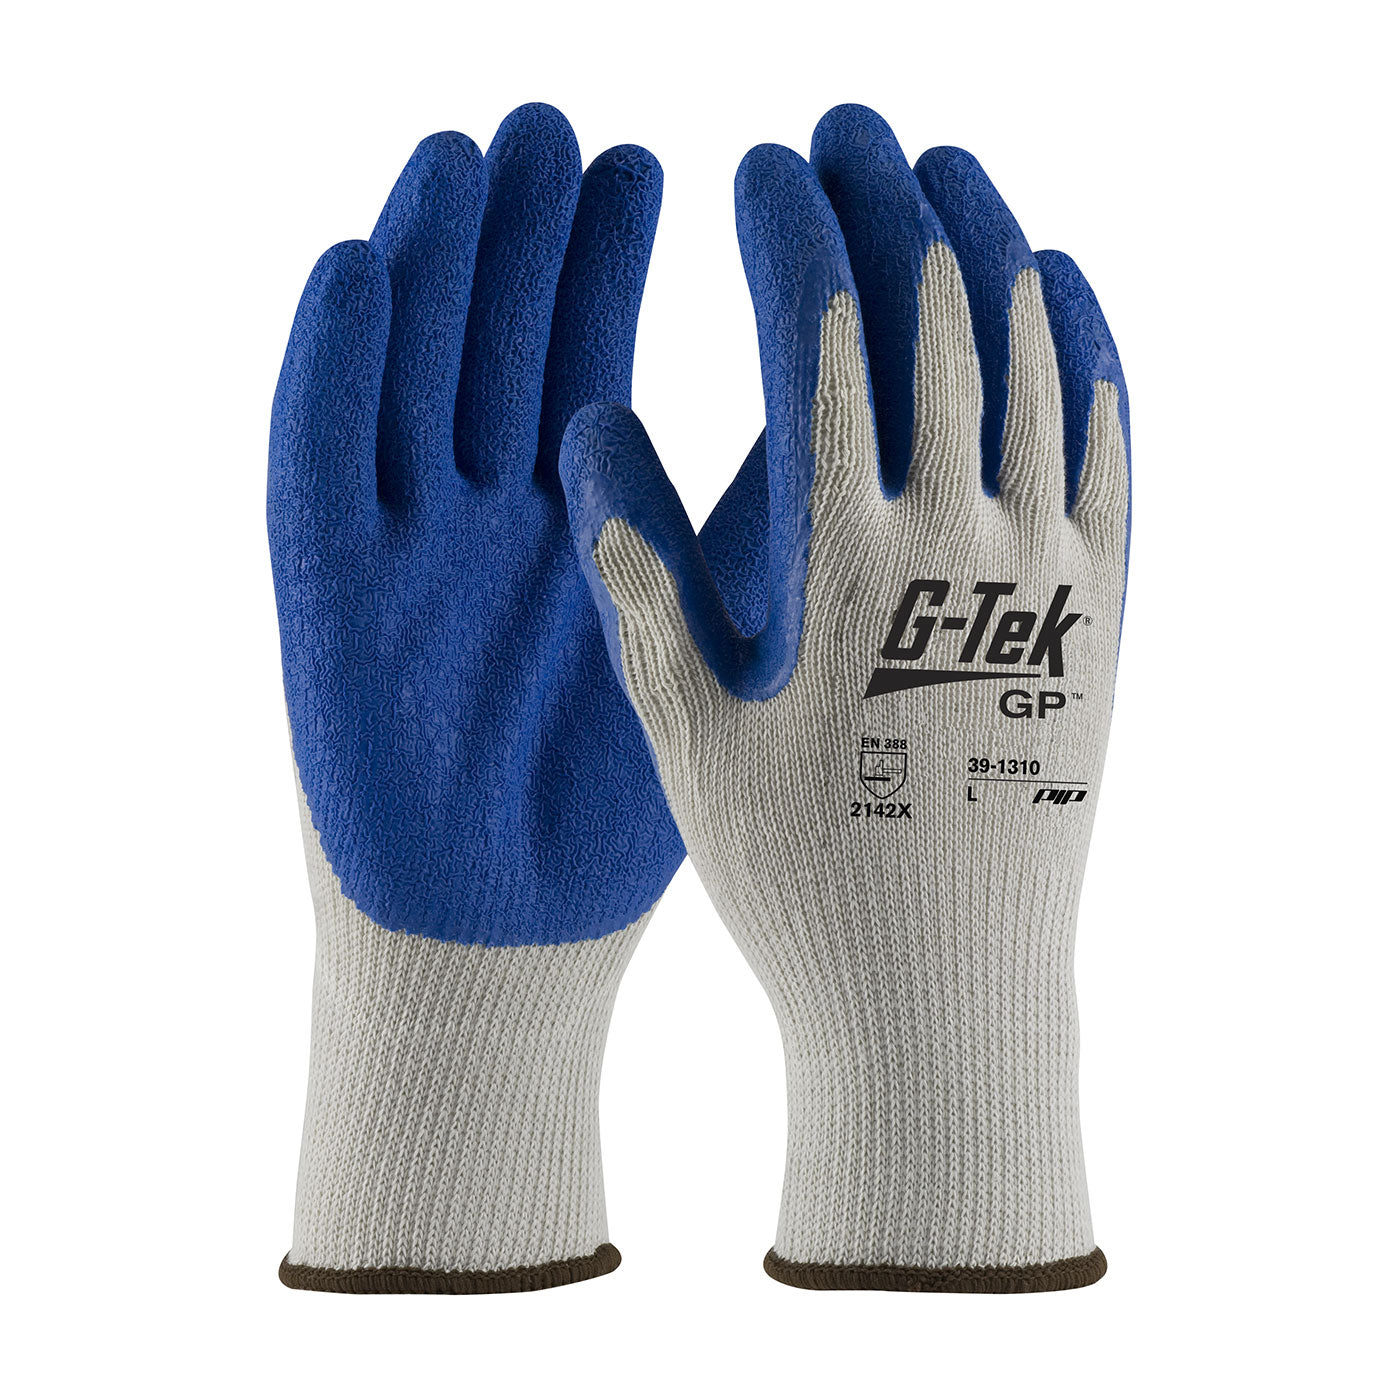 G-Tek® GP Polyester Glove with Latex Coated Crinkle Grip